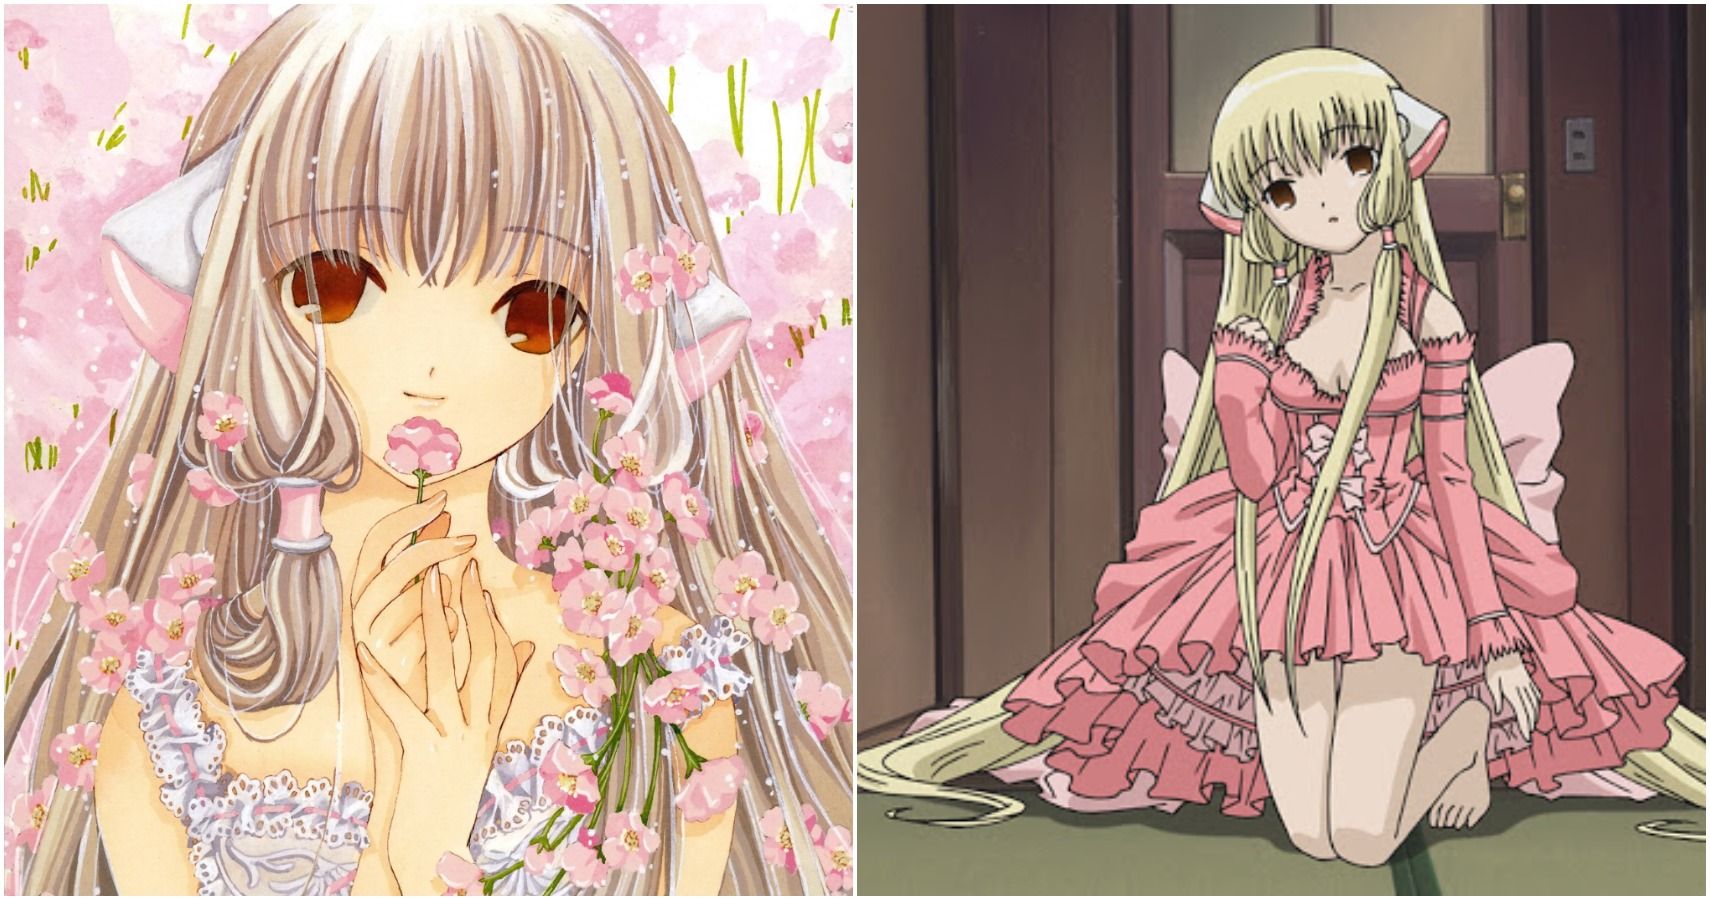 Chobits 20th Anniversary Edition 1 Review • Anime UK News